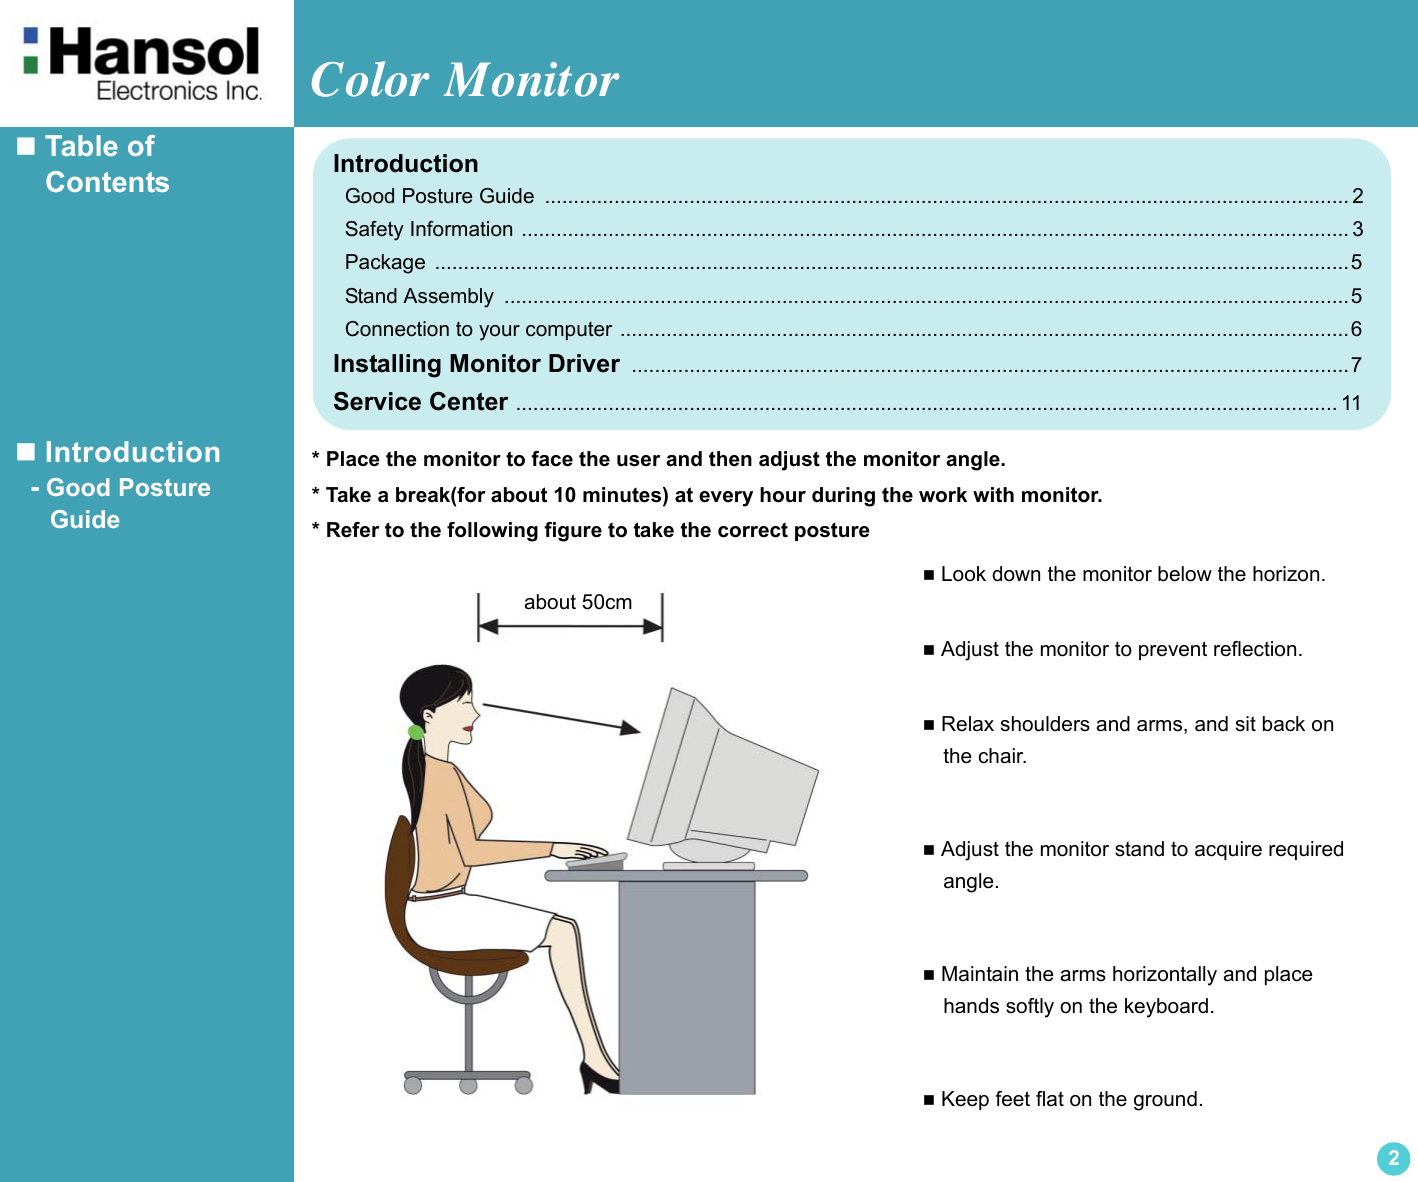 Color Monitor2 Table of     Contents Introduction  - Good Posture     Guide Look down the monitor below the horizon. Adjust the monitor to prevent reflection. Relax shoulders and arms, and sit back on  the chair. Adjust the monitor stand to acquire required  angle. Maintain the arms horizontally and place  hands softly on the keyboard. Keep feet flat on the ground.about 50cmIntroduction  Good Posture Guide  ........................................................................................................................................... 2  Safety Information ............................................................................................................................................... 3  Package  ..............................................................................................................................................................5  Stand Assembly  ..................................................................................................................................................5    Connection to your computer ..............................................................................................................................6Installing Monitor Driver  ............................................................................................................................7Service Center .............................................................................................................................................. 11* Place the monitor to face the user and then adjust the monitor angle.* Take a break(for about 10 minutes) at every hour during the work with monitor.* Refer to the following figure to take the correct posture